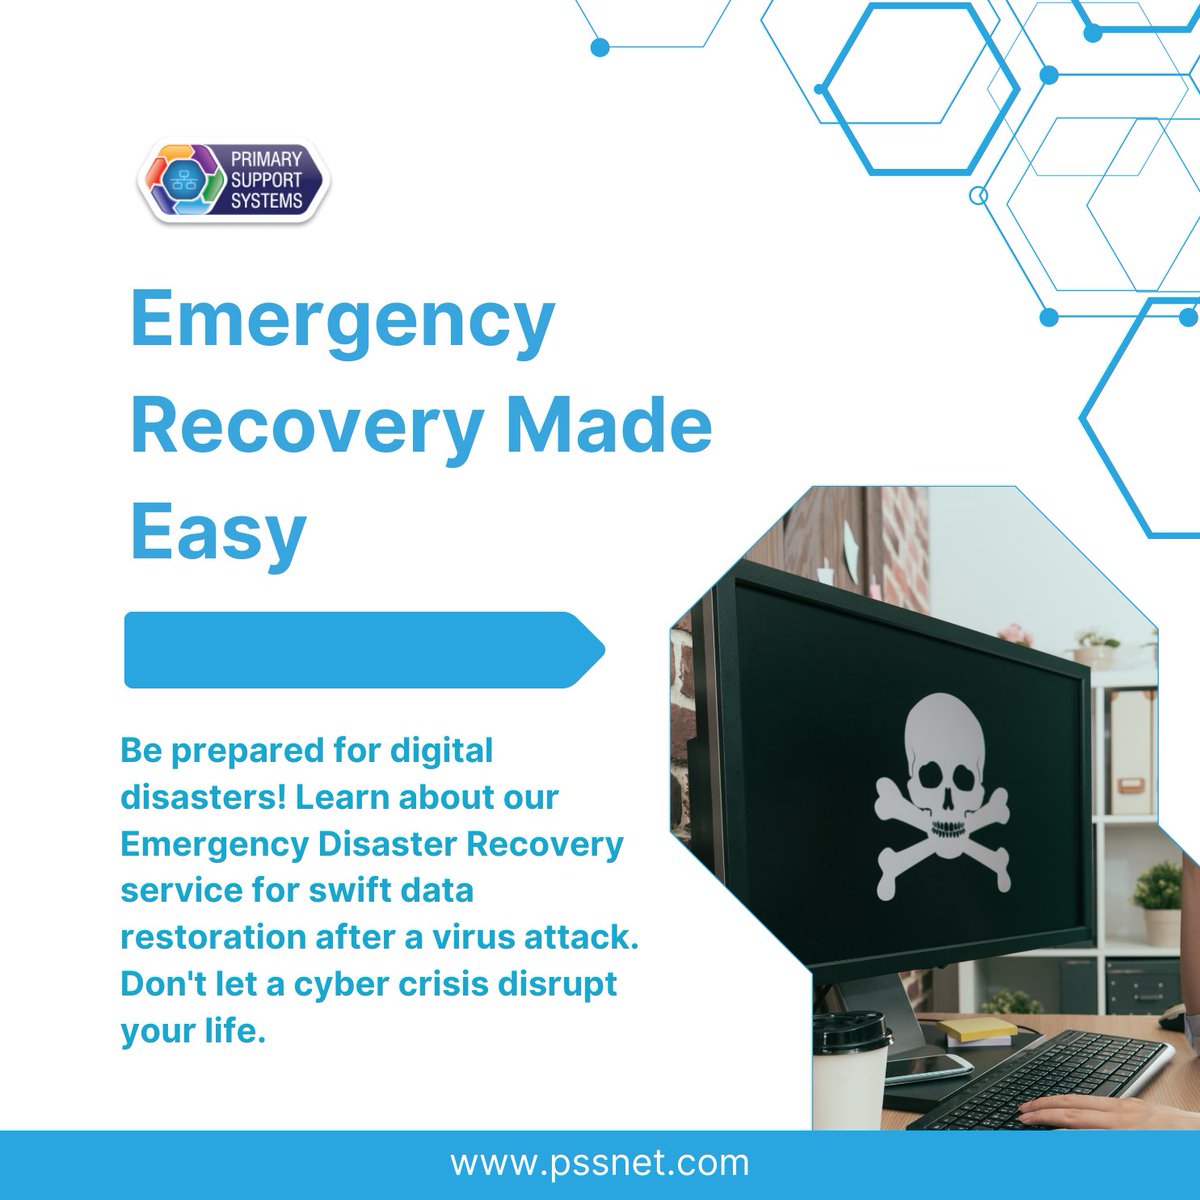 Emergency Recovery Made Easy

Be prepared for digital disasters! Learn about our Emergency Disaster Recovery service for swift data restoration after a virus attack. Don't let a cyber crisis disrupt your life.
#emergencyrecovery #datarestoration 
Website: pssnet.com